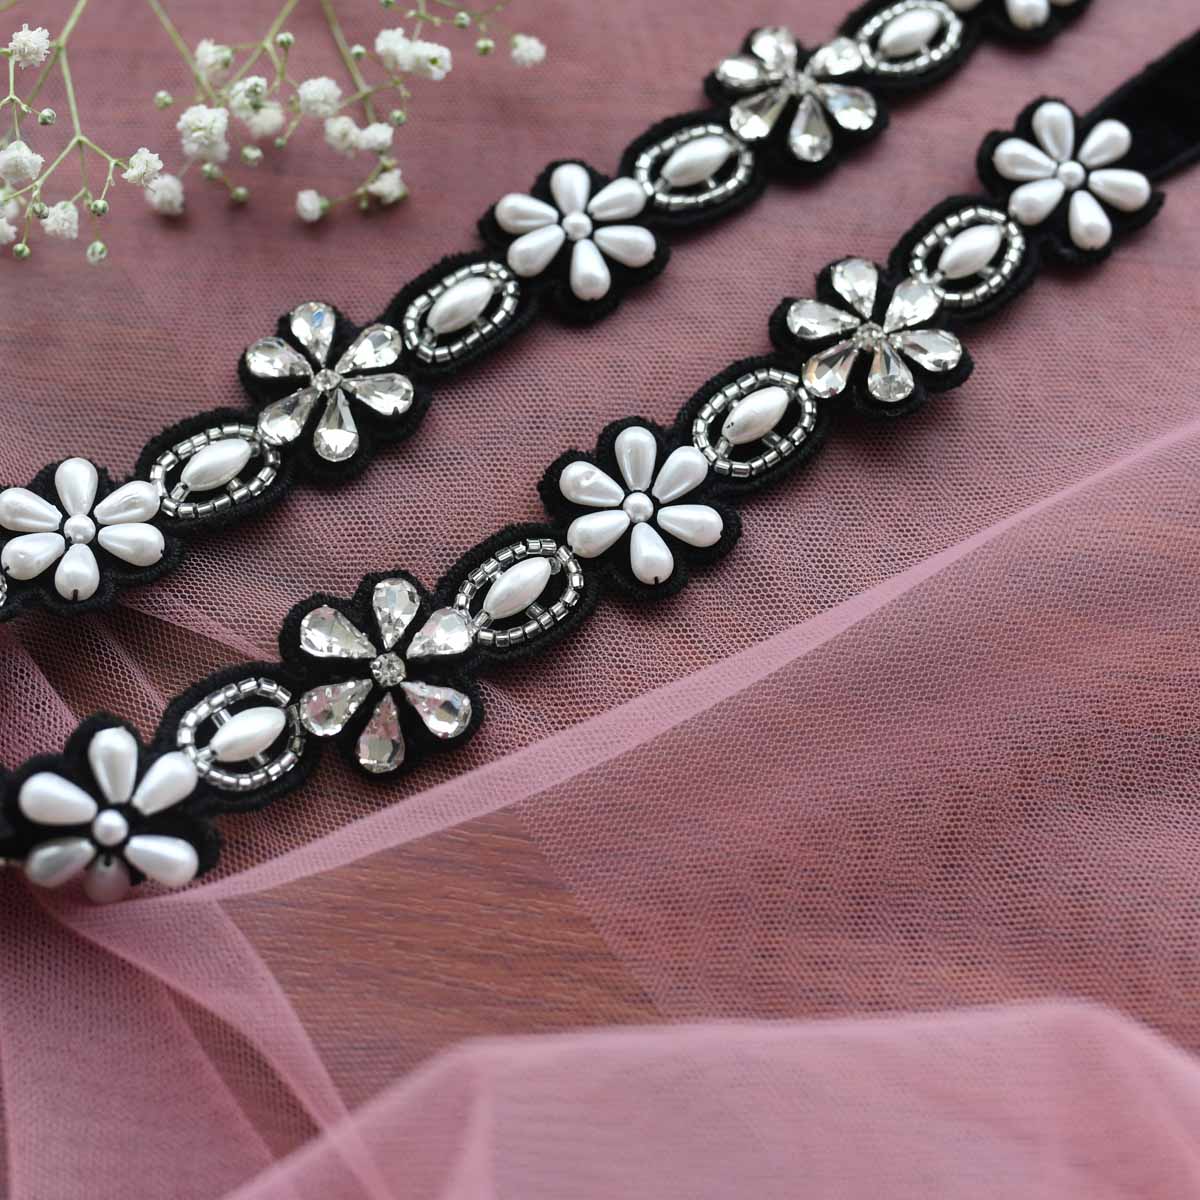 Embroidered Tie up Headband with alternating Pearl and Crystal Flowers